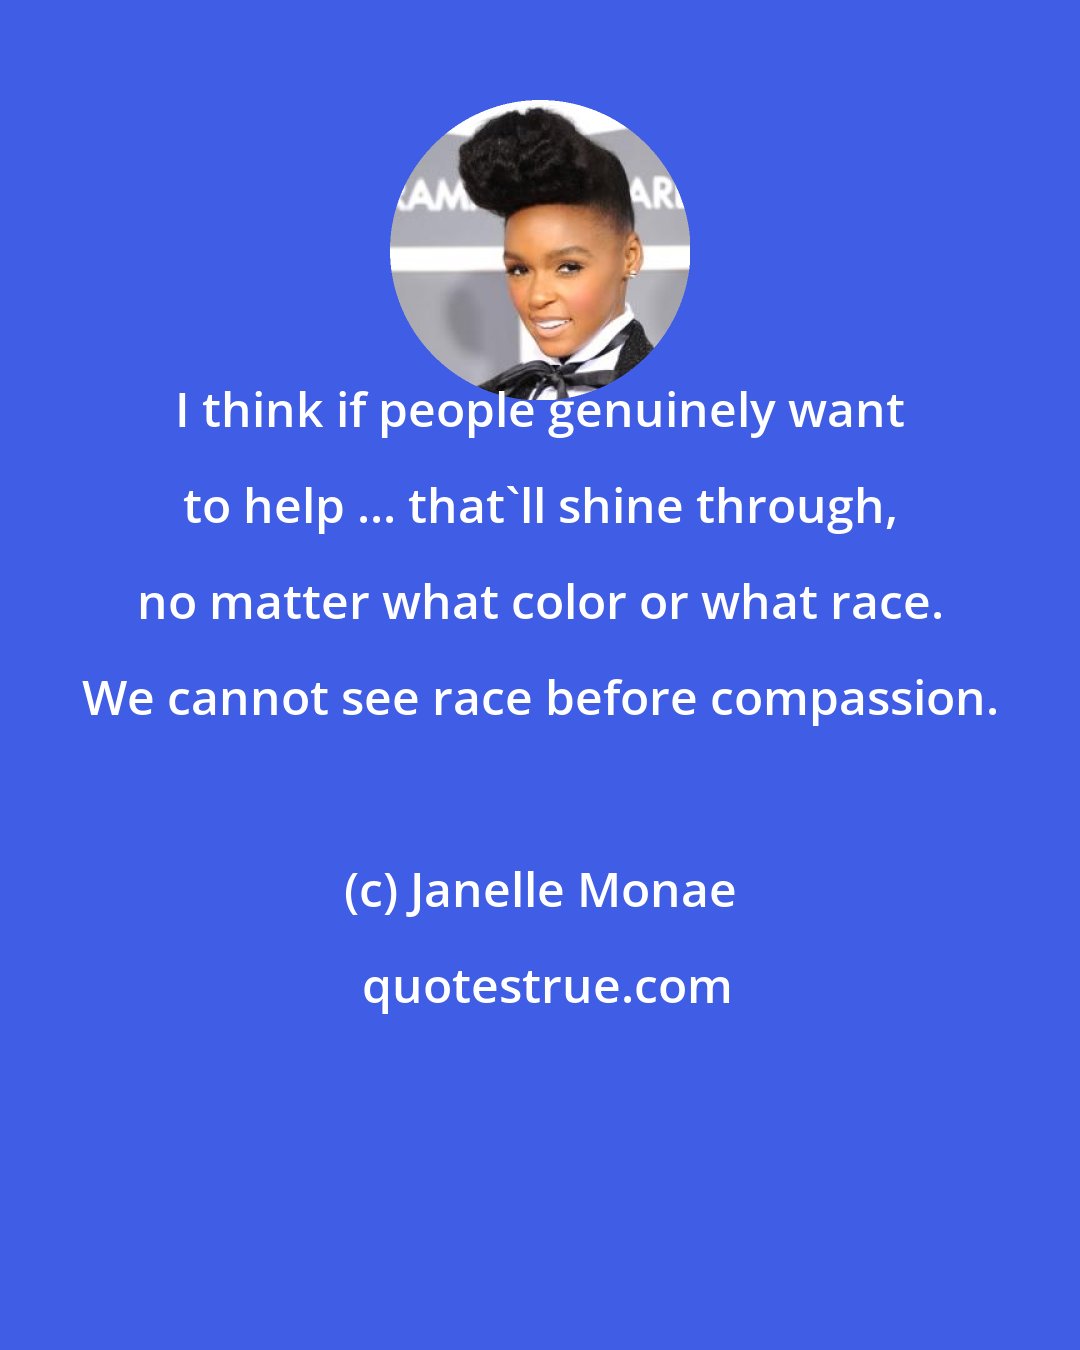 Janelle Monae: I think if people genuinely want to help ... that'll shine through, no matter what color or what race. We cannot see race before compassion.